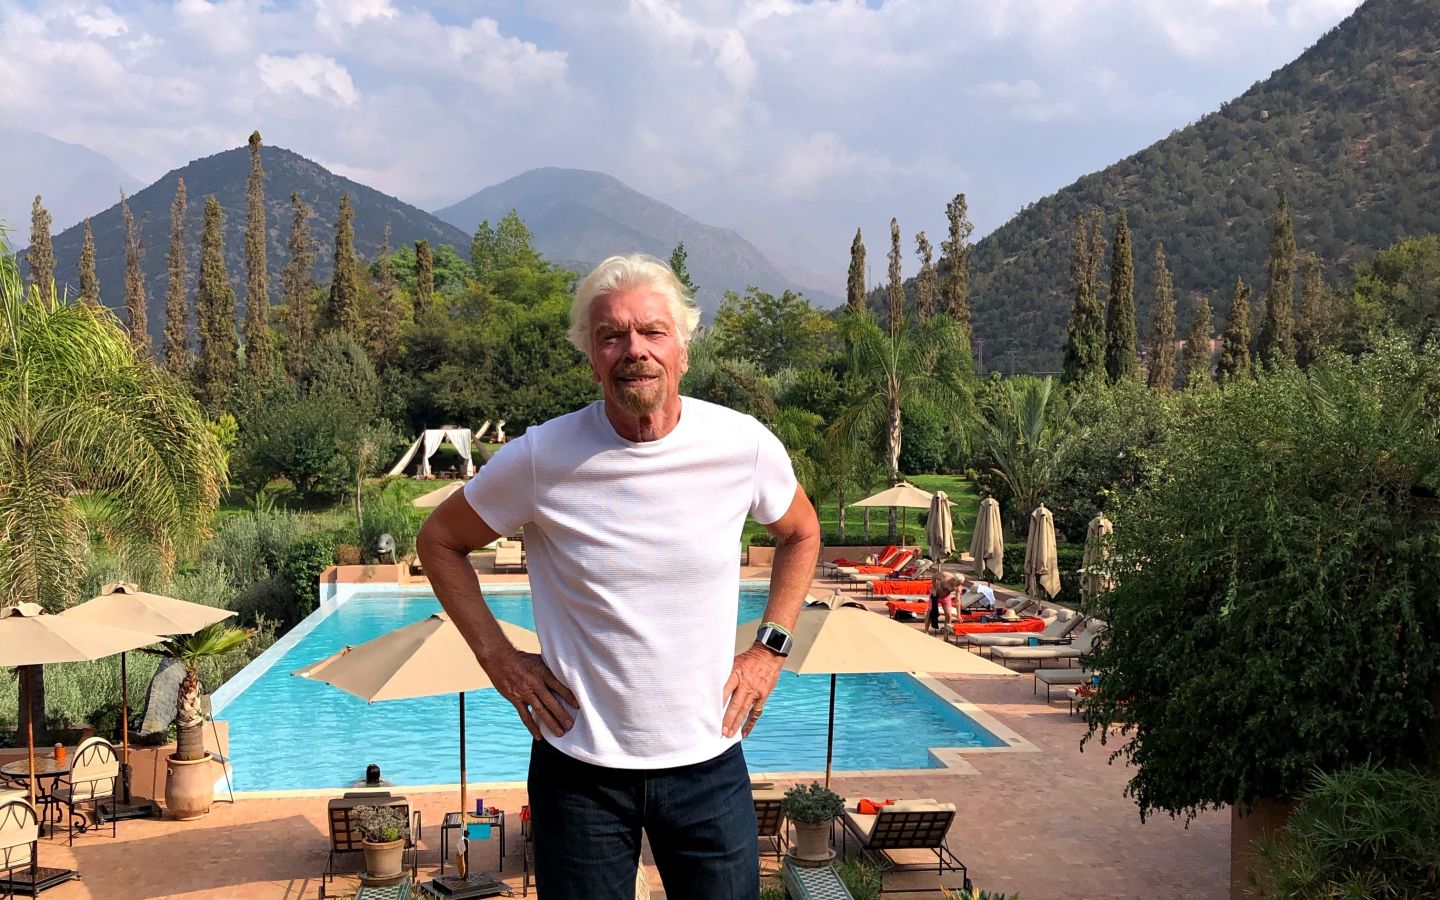 Richard Branson smiling in front of the pool at Kasbah Tamadot